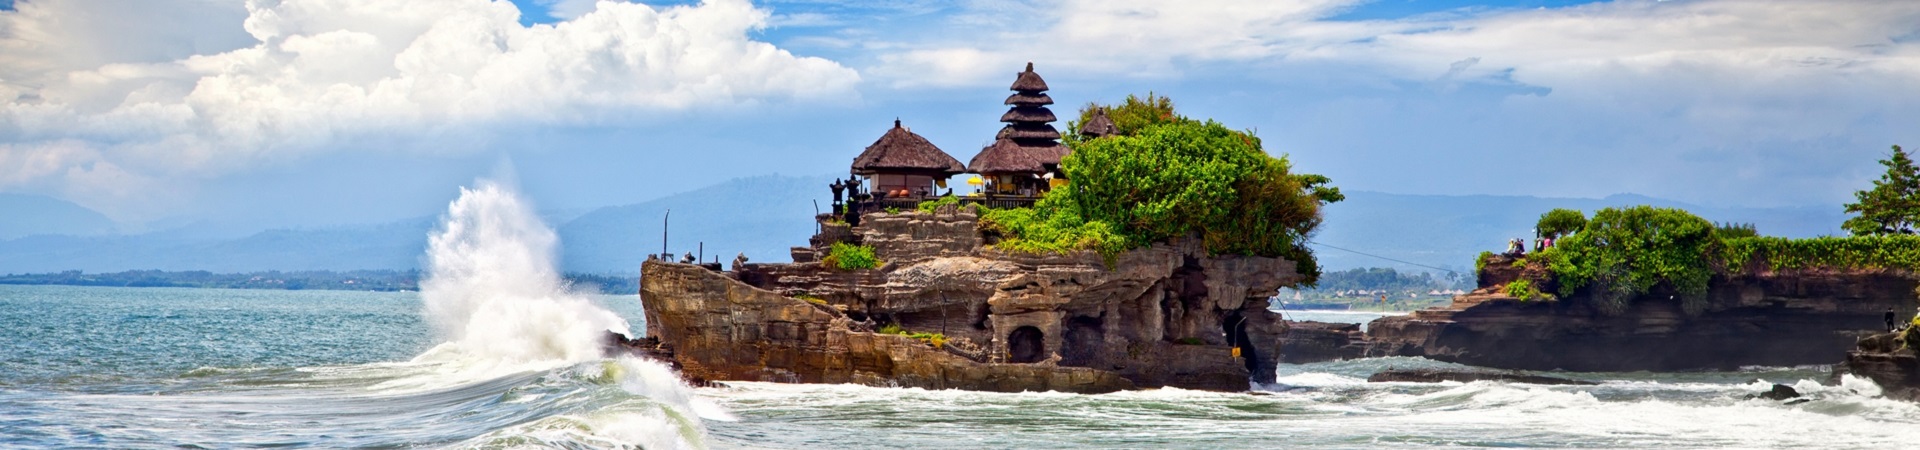 Image of Tanah Lot and Royal Dinner